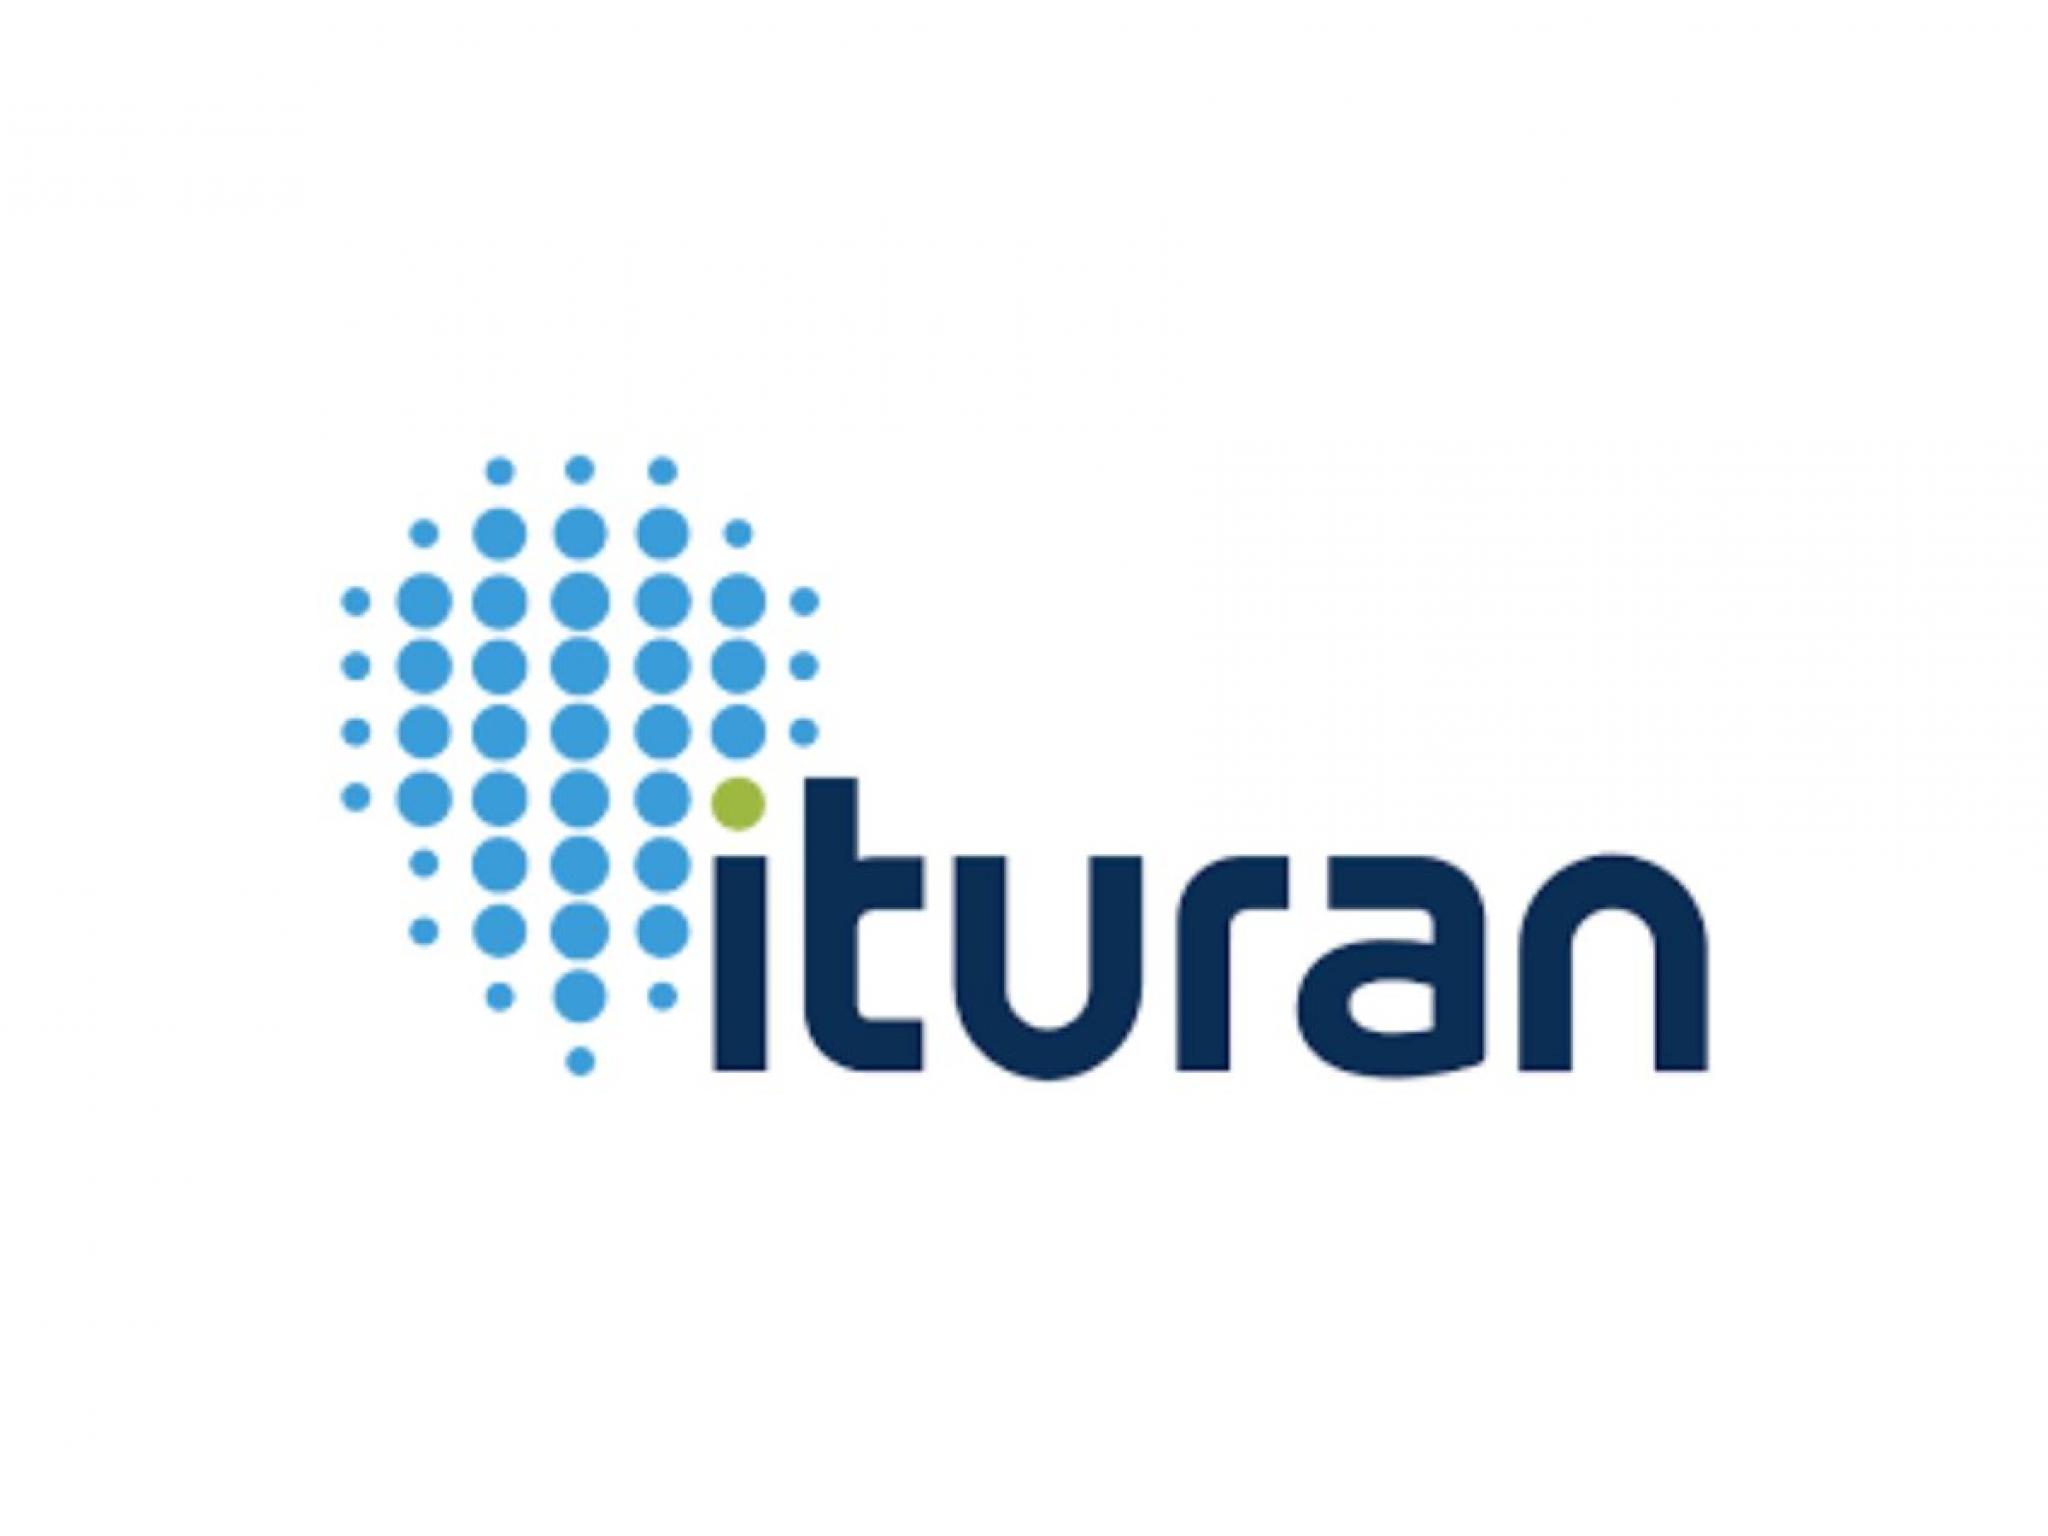  ituran-location-and-control-posts-q3-results-joins-crown-castle-shopify-and-other-big-stocks-moving-higher-on-monday 